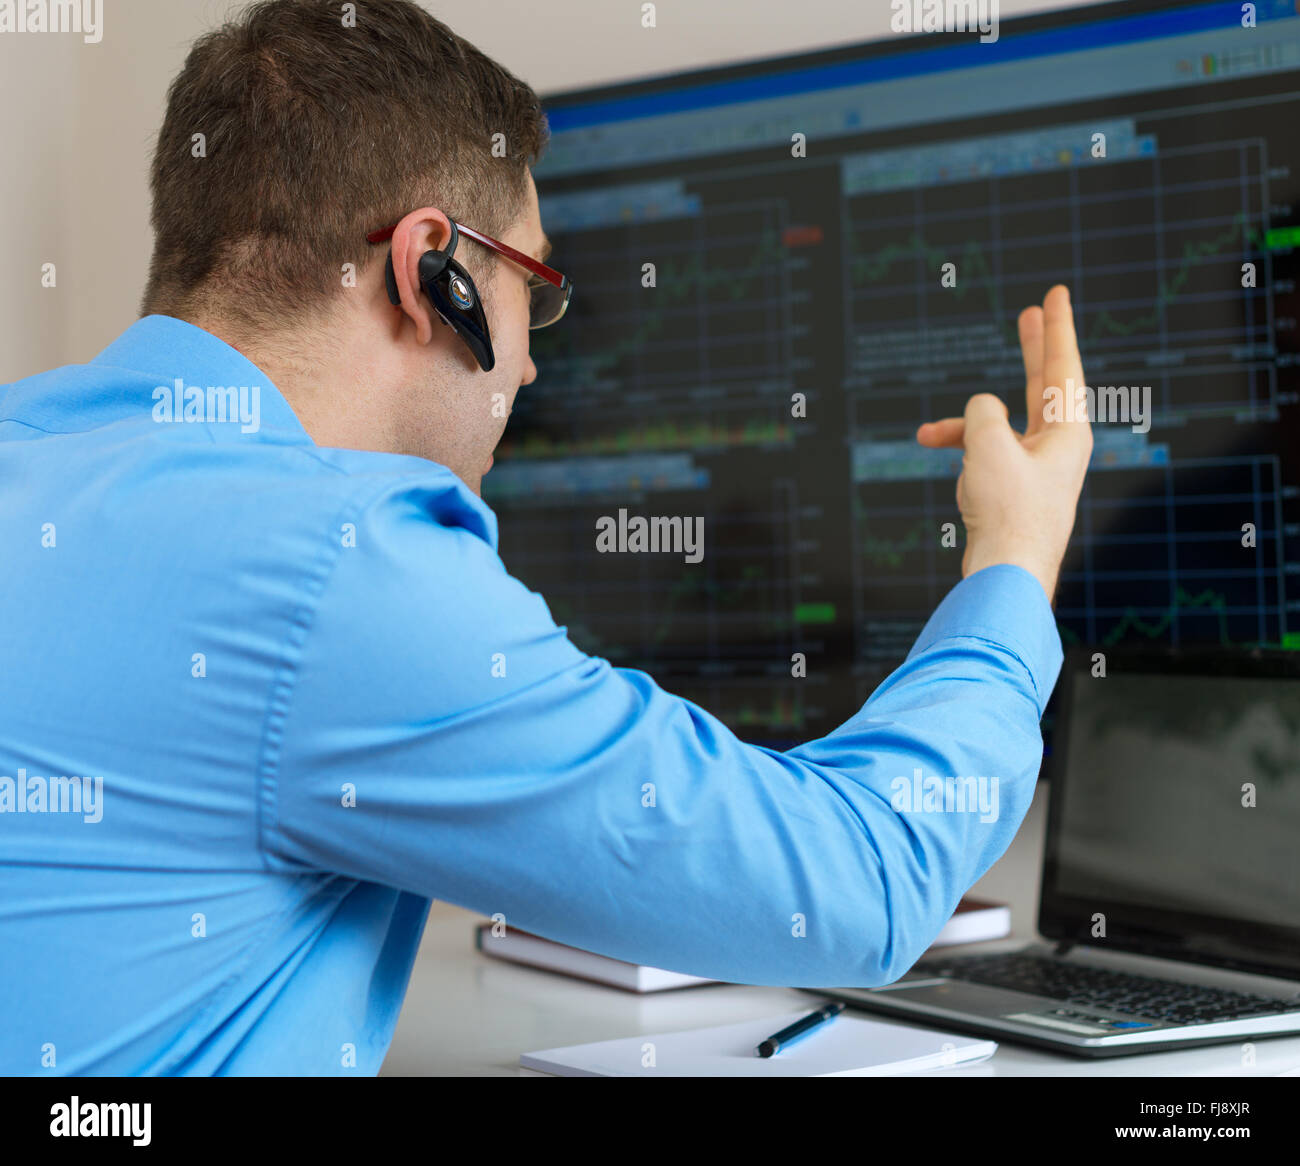 Upset stock trader in front of computer. Stock Photo